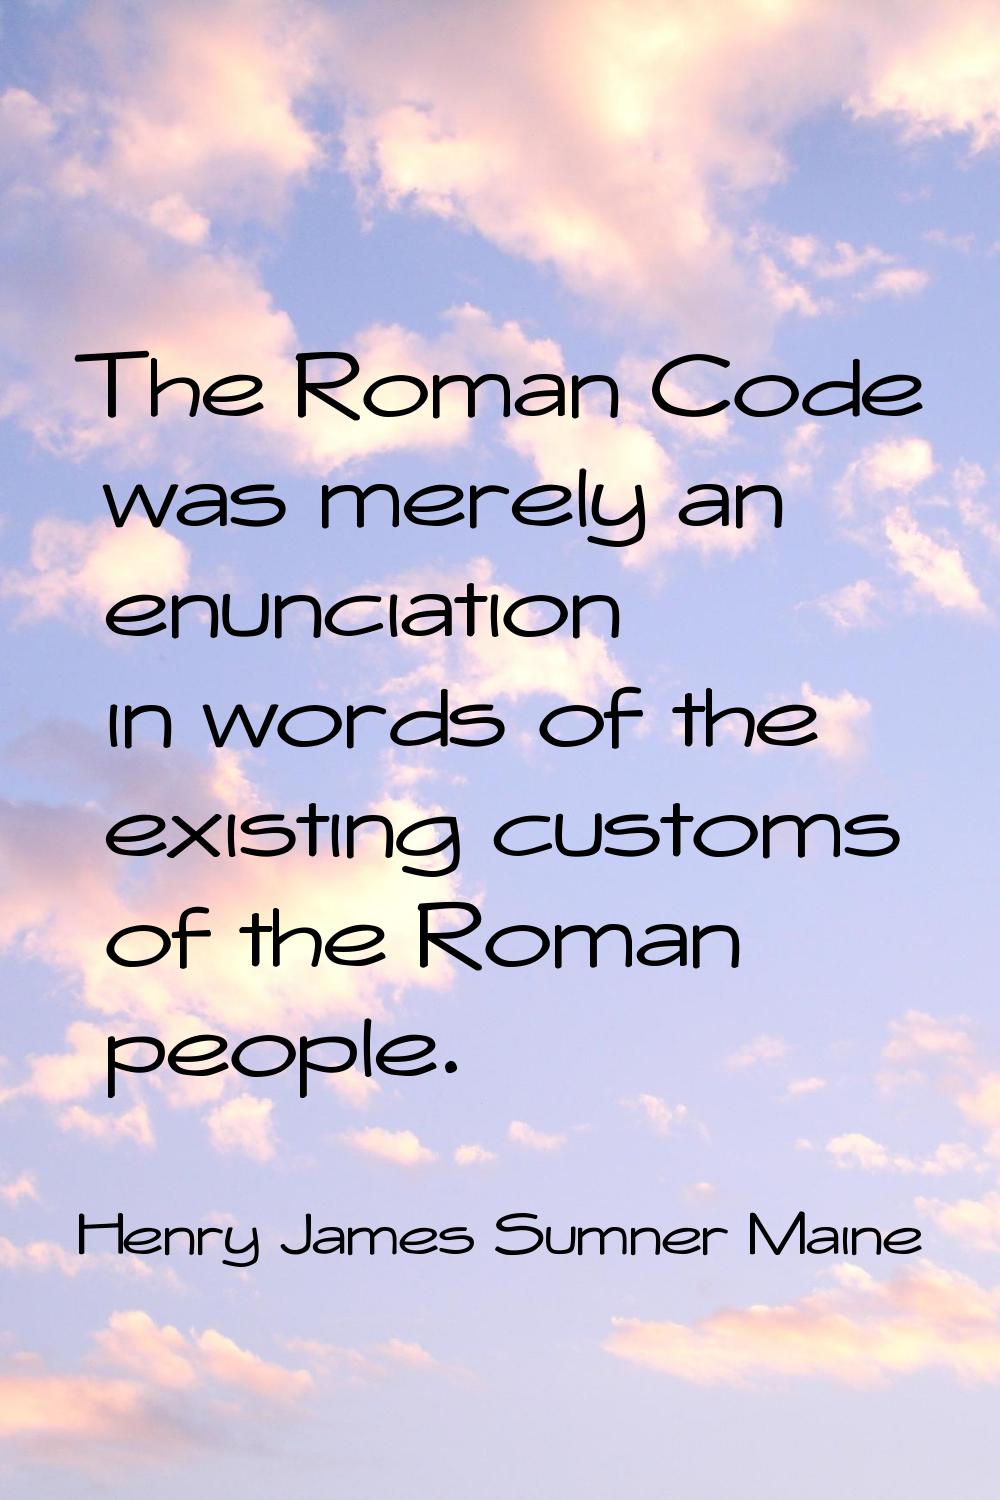 The Roman Code was merely an enunciation in words of the existing customs of the Roman people.